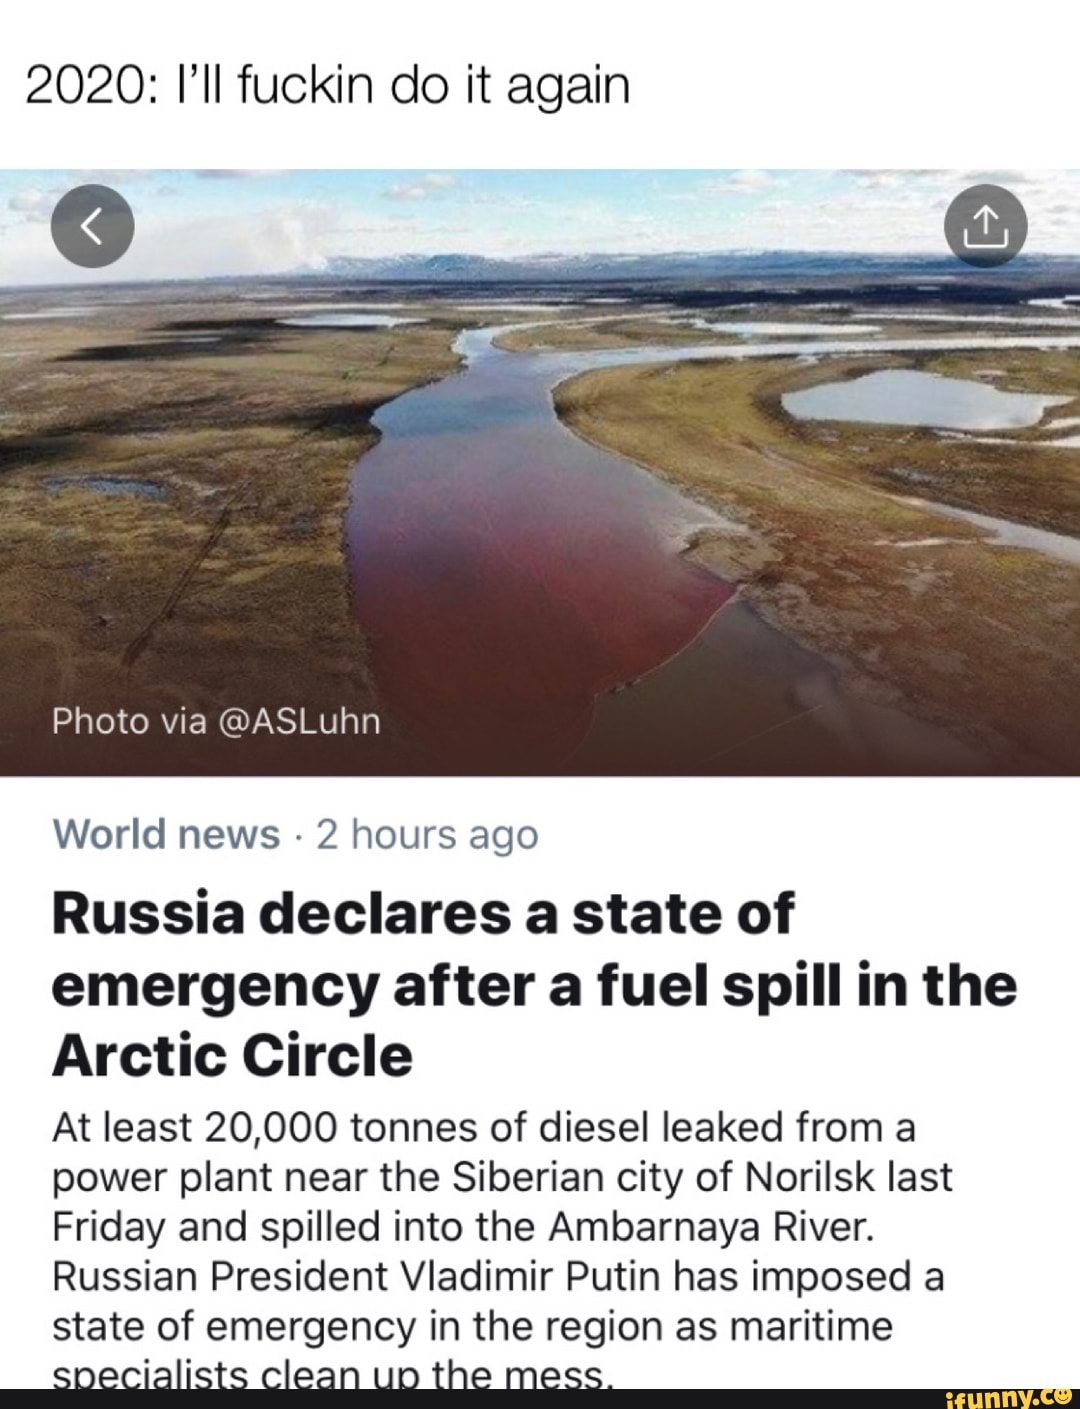 2020 Ill Fuckin Do It Again Russia Declares A State Of Emergency After A Fuel Spill In The